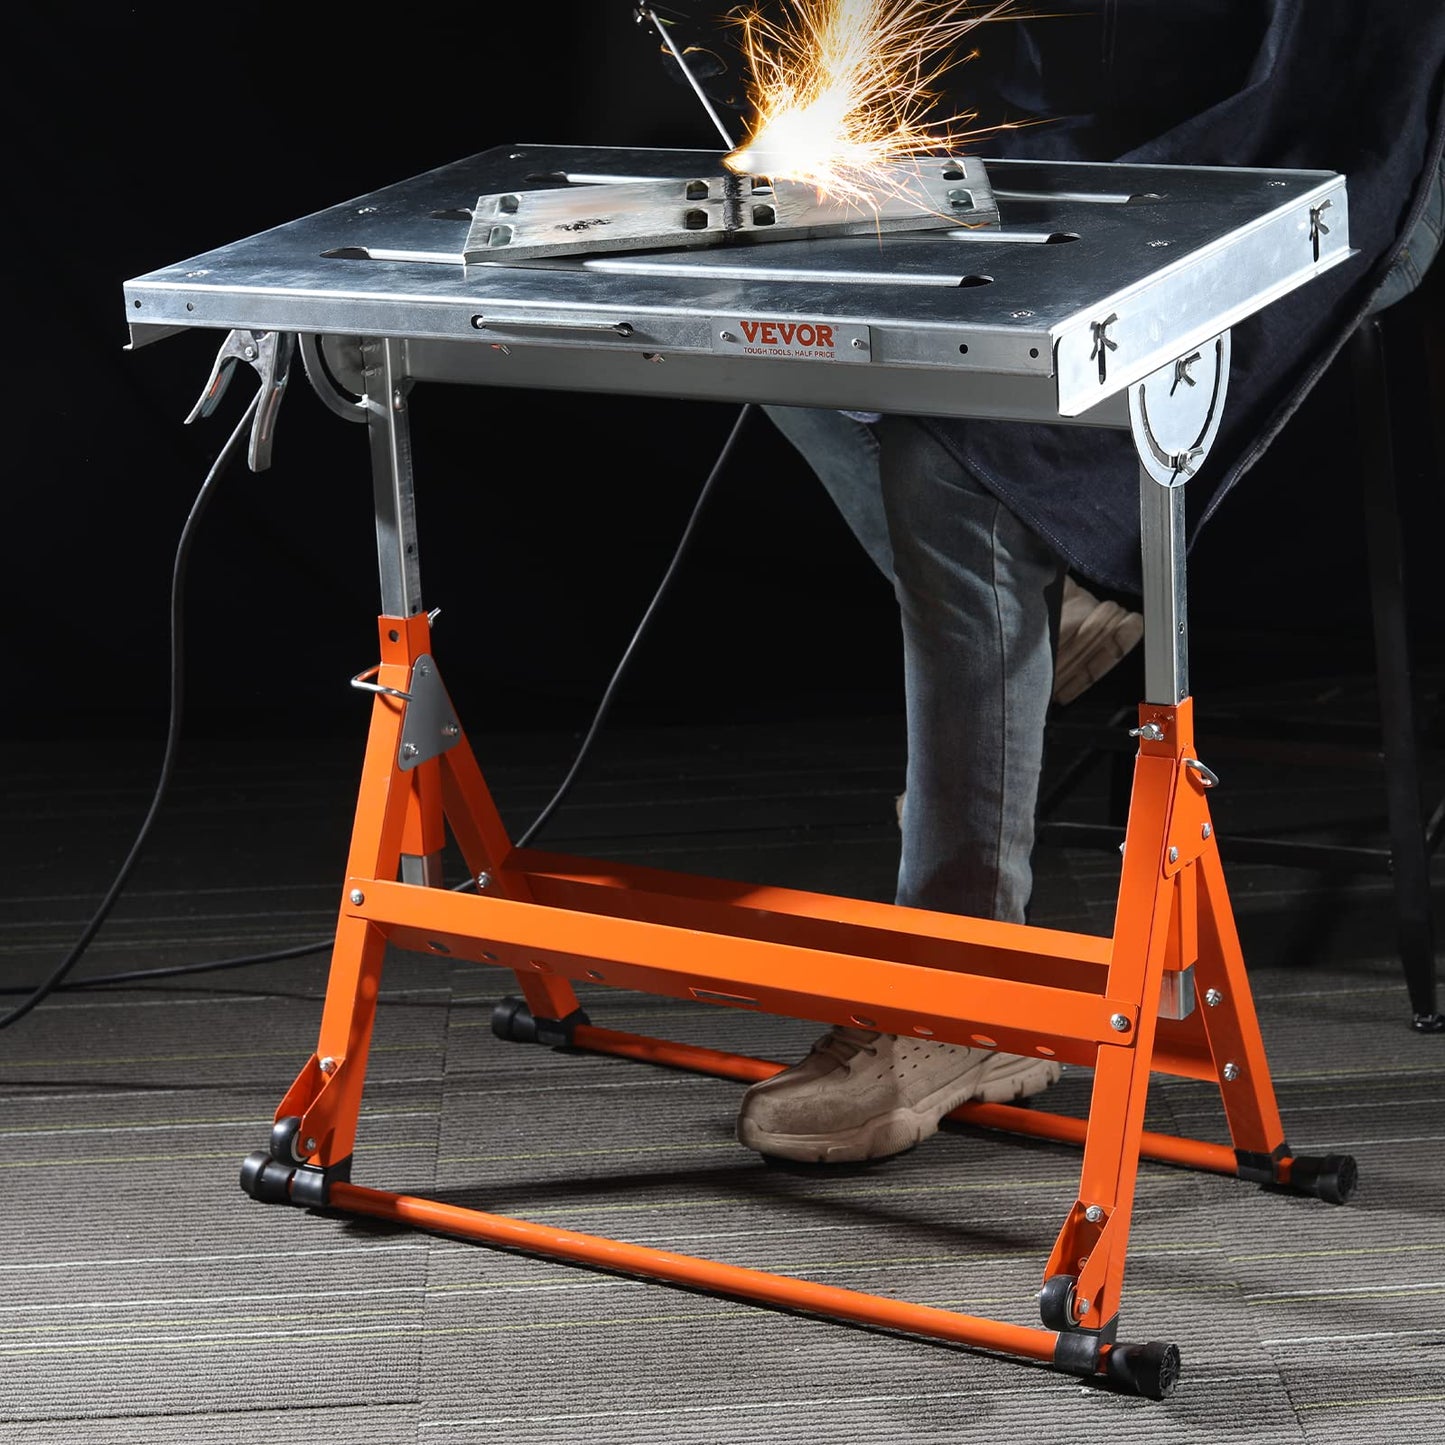 VEVOR Welding Table 30"x20", 400lbs Load Capacity Steel Welding Workbench Table on Wheels, Folding Work Bench with Three 1.1" Slot, 3 Tilt Angles,